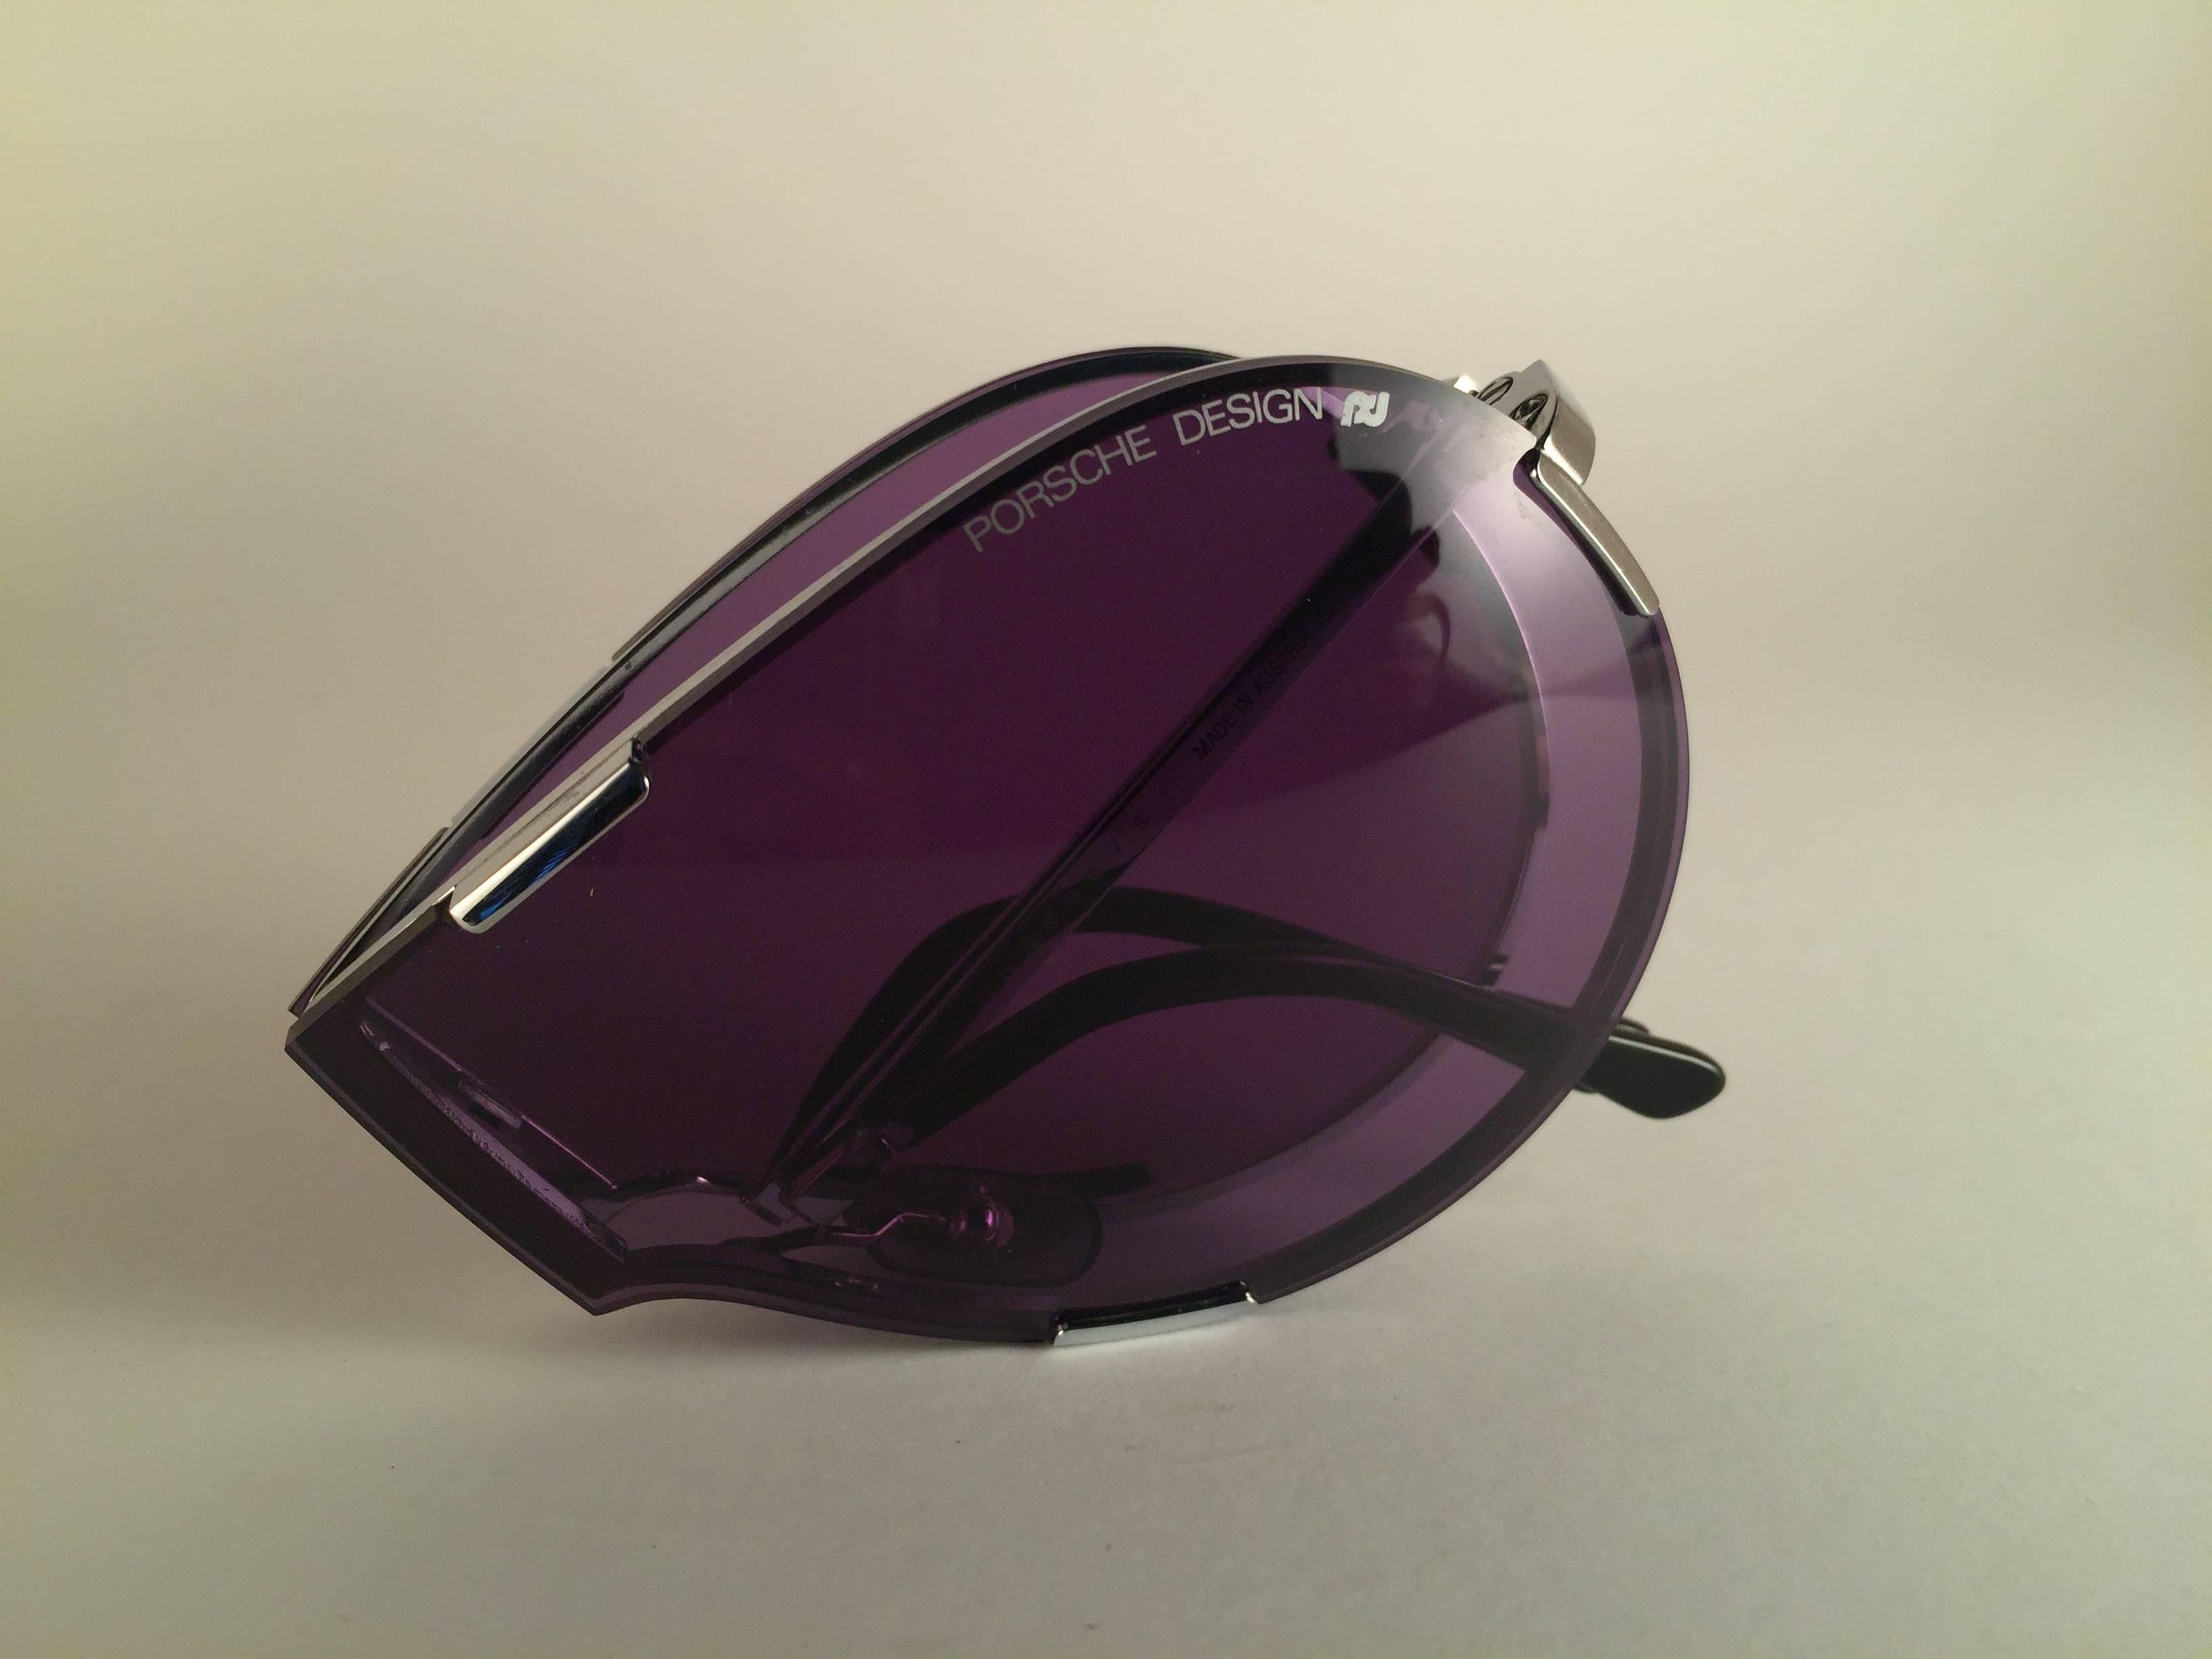 New 1980's Porsche Design 5629 Silver foldable frame with purple lenses.  Amazing craftsmanship and quality.  Comes with the original Porsche hard case thats has some wear on it due to nearly 40 years of storage. 
New, never worn. Made in Austria.